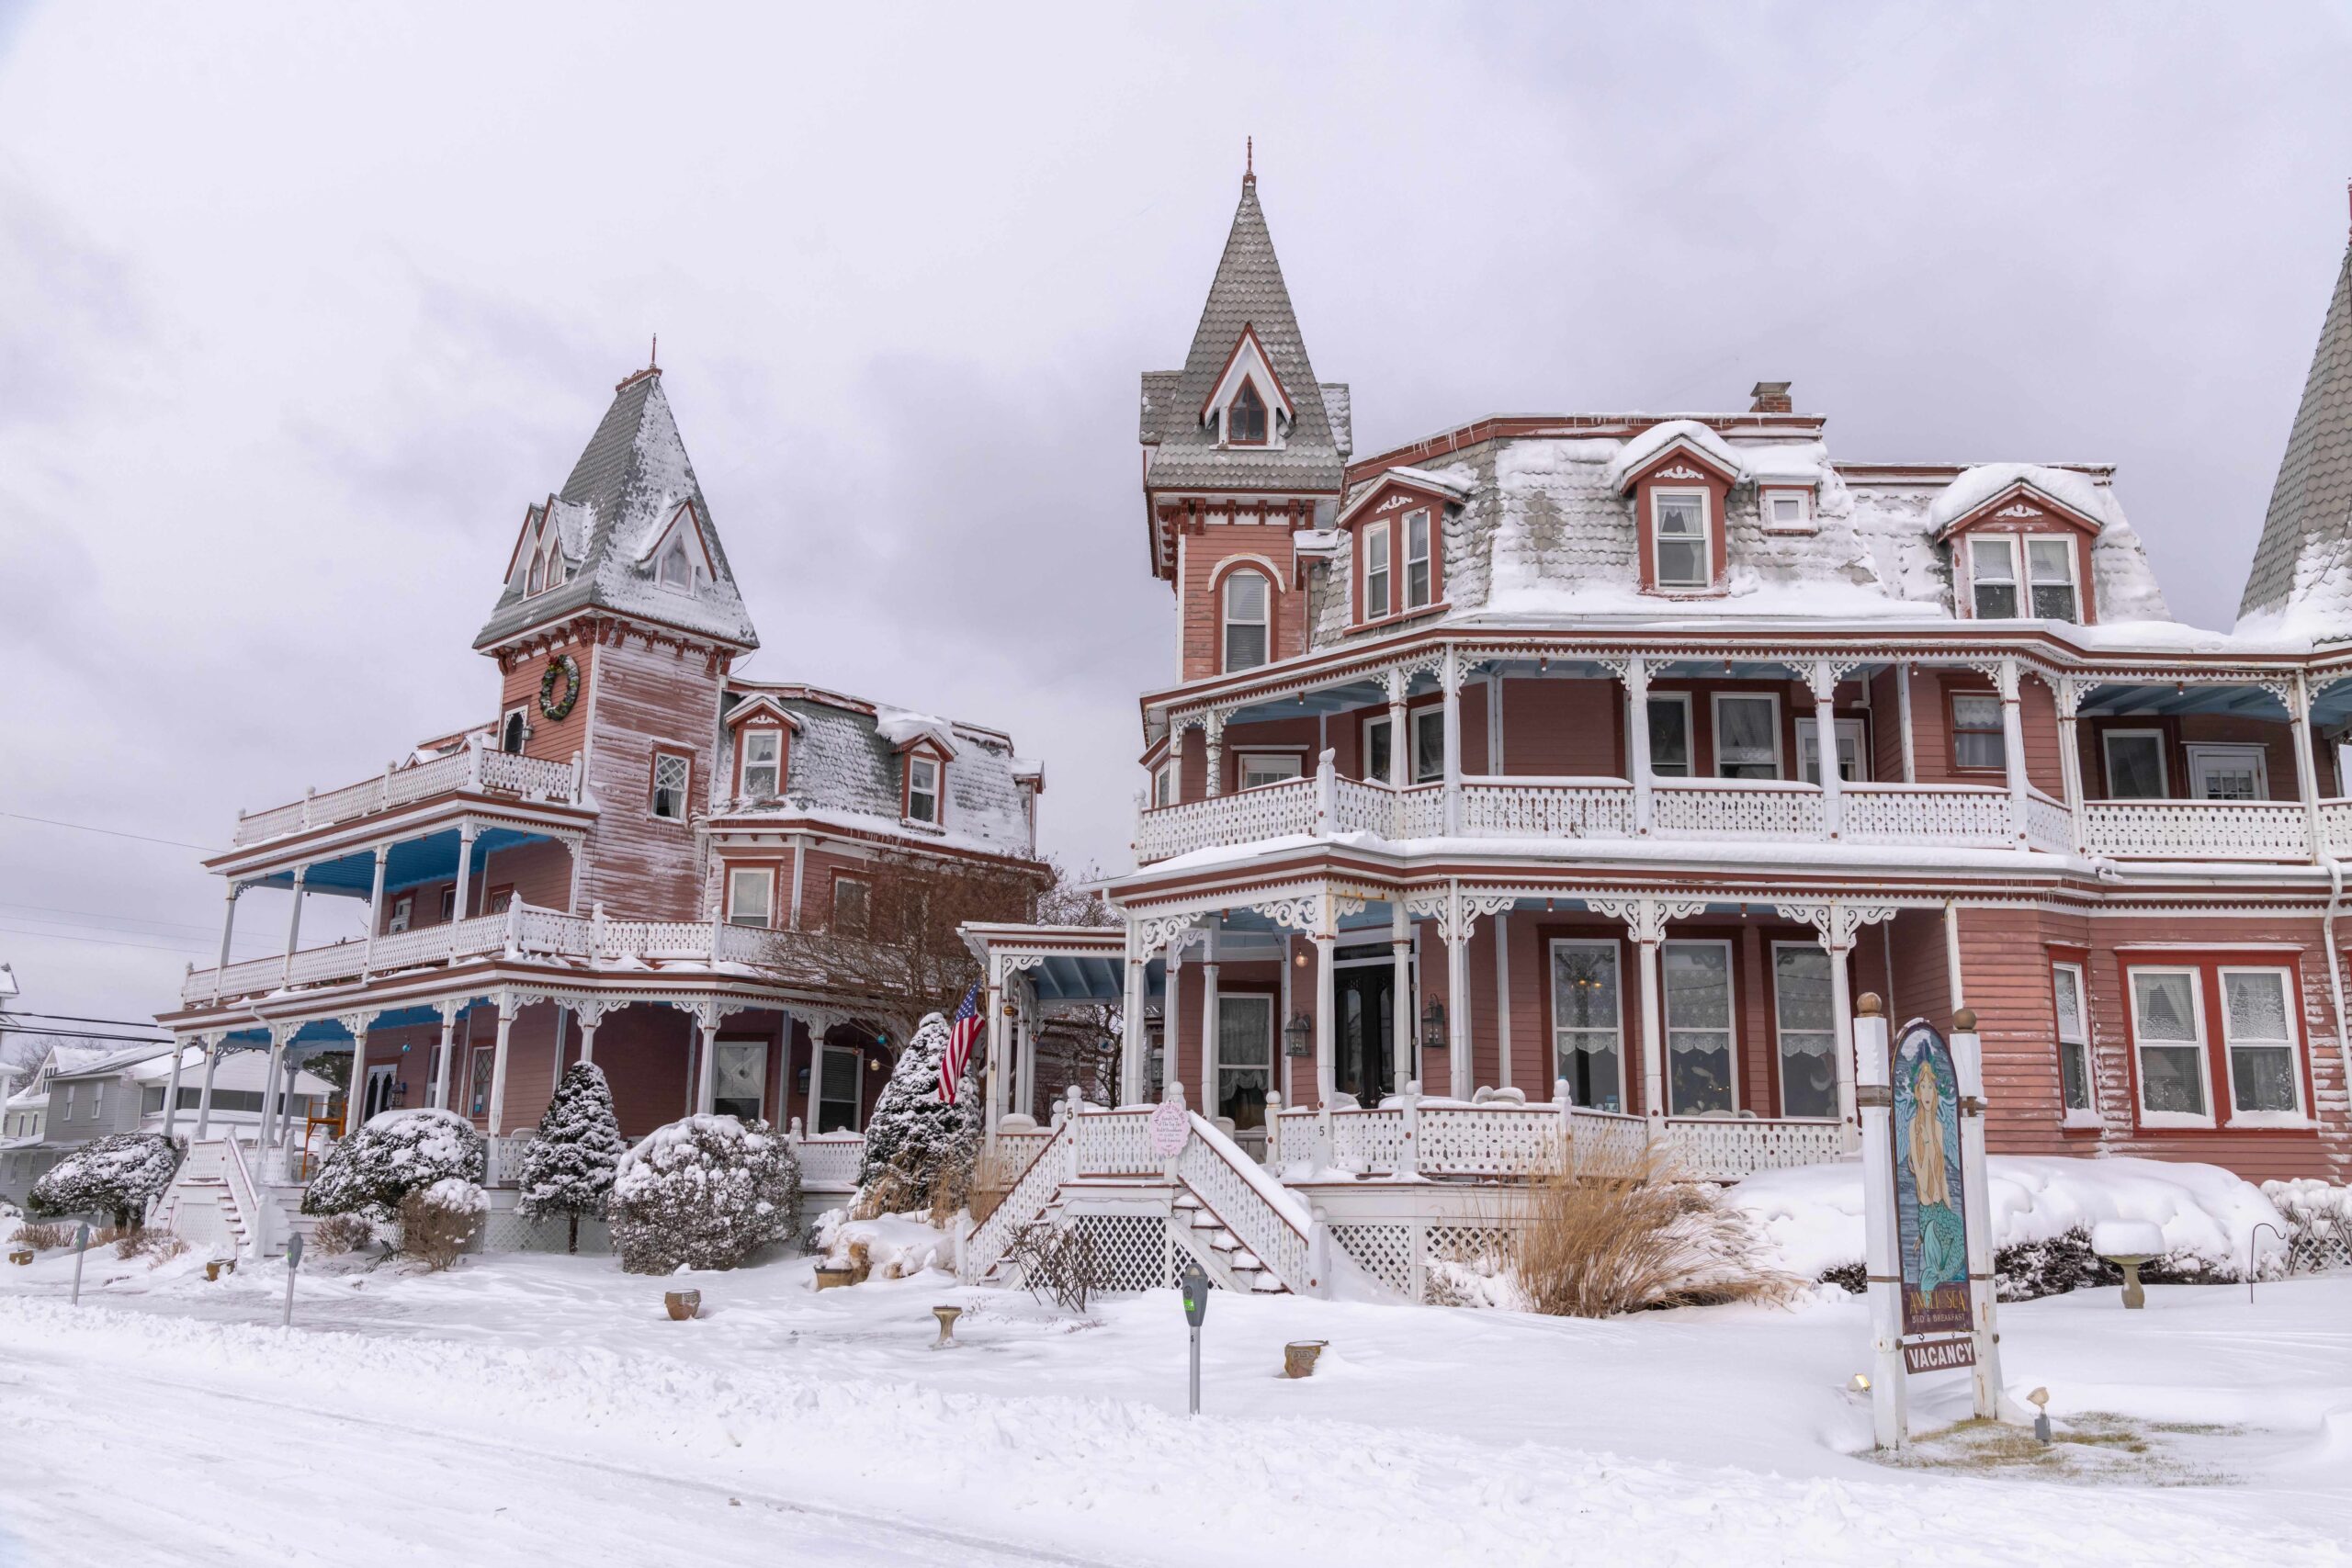 Angel of the Sea (two Victorian styled bed and breakfasts with pink and red siding) covered in snow with a cloudy sky